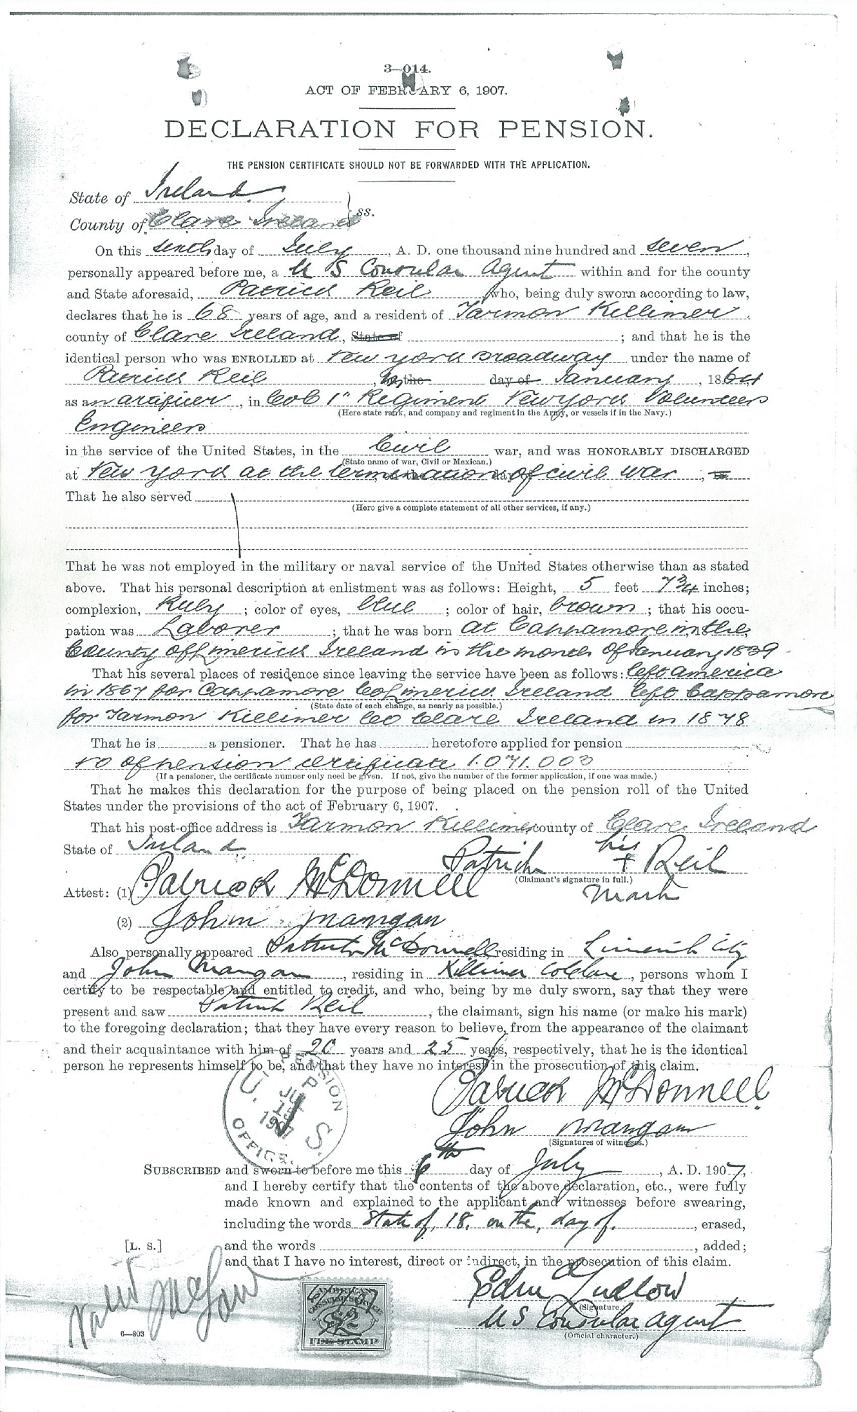 Patrick Real Pension Document July 1907.jpg